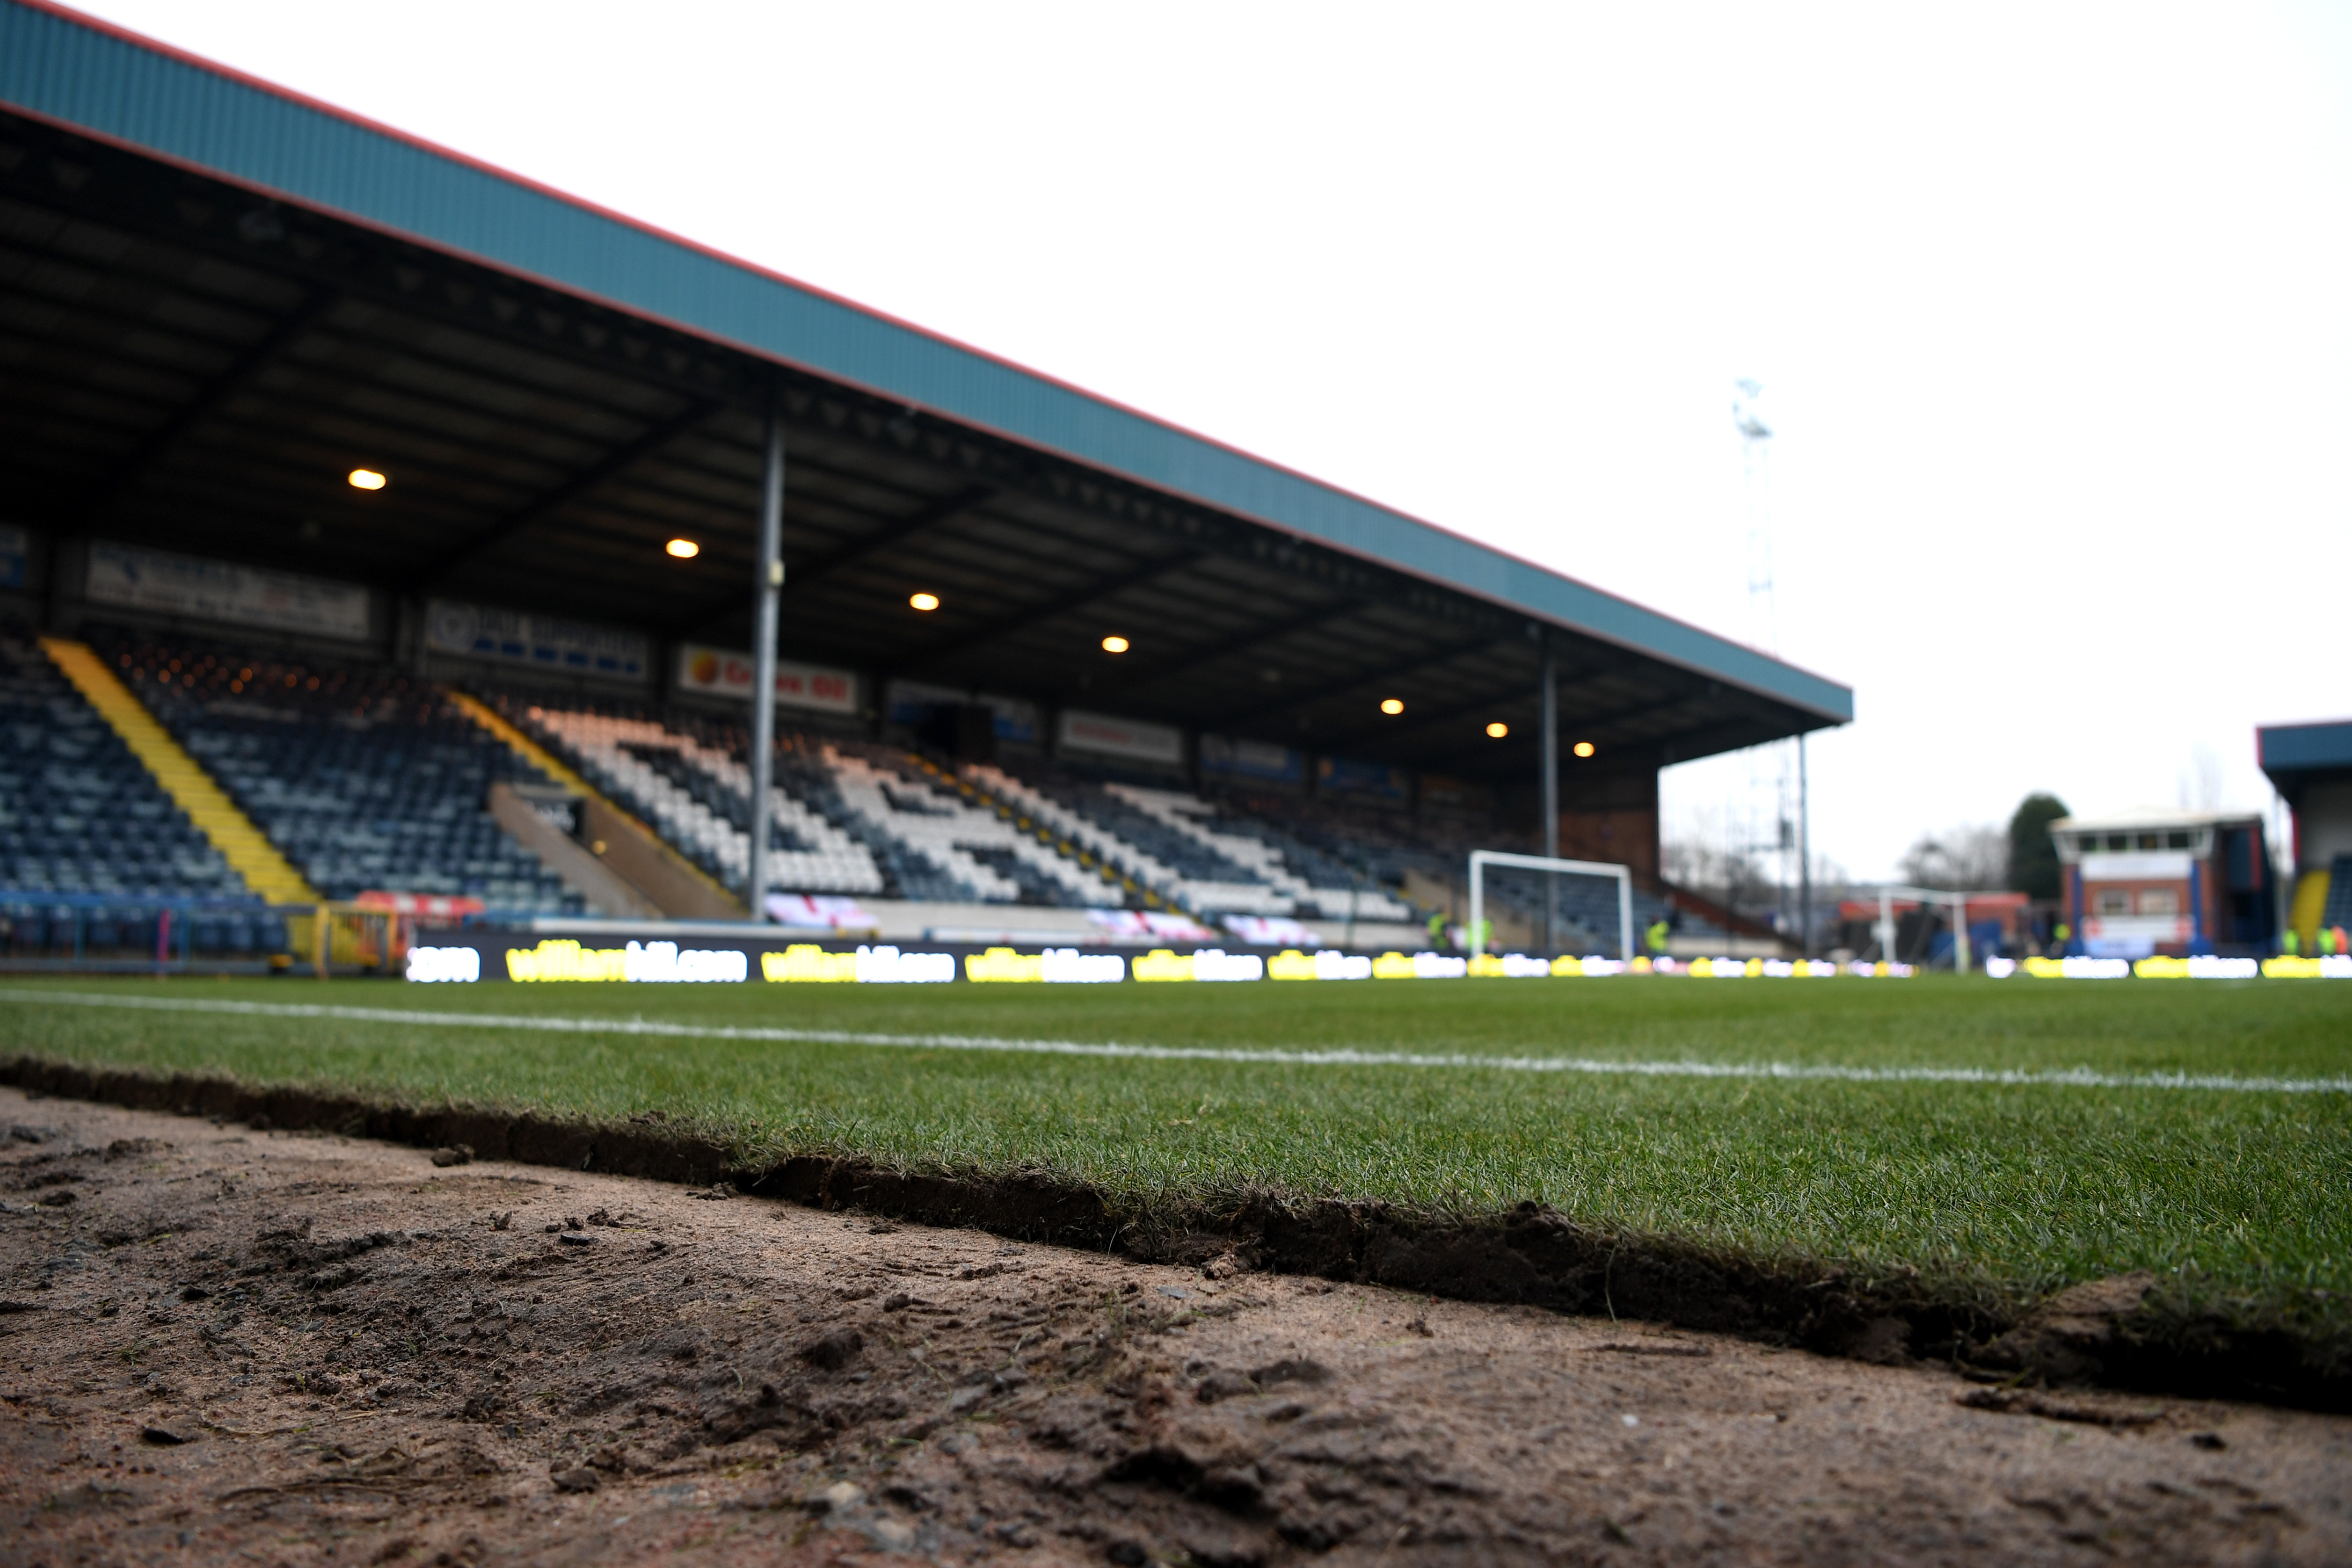 ROCHDALE, ENGLAND - FEBRUARY 18:  A general view of Spotland Stadium ahead of The Emirates FA Cup Fifth Round match between Rochdale and Tottenham Hotspur on February 18, 2018 in Rochdale, United Kingdom.  (Photo by Gareth Copley/Getty Images)